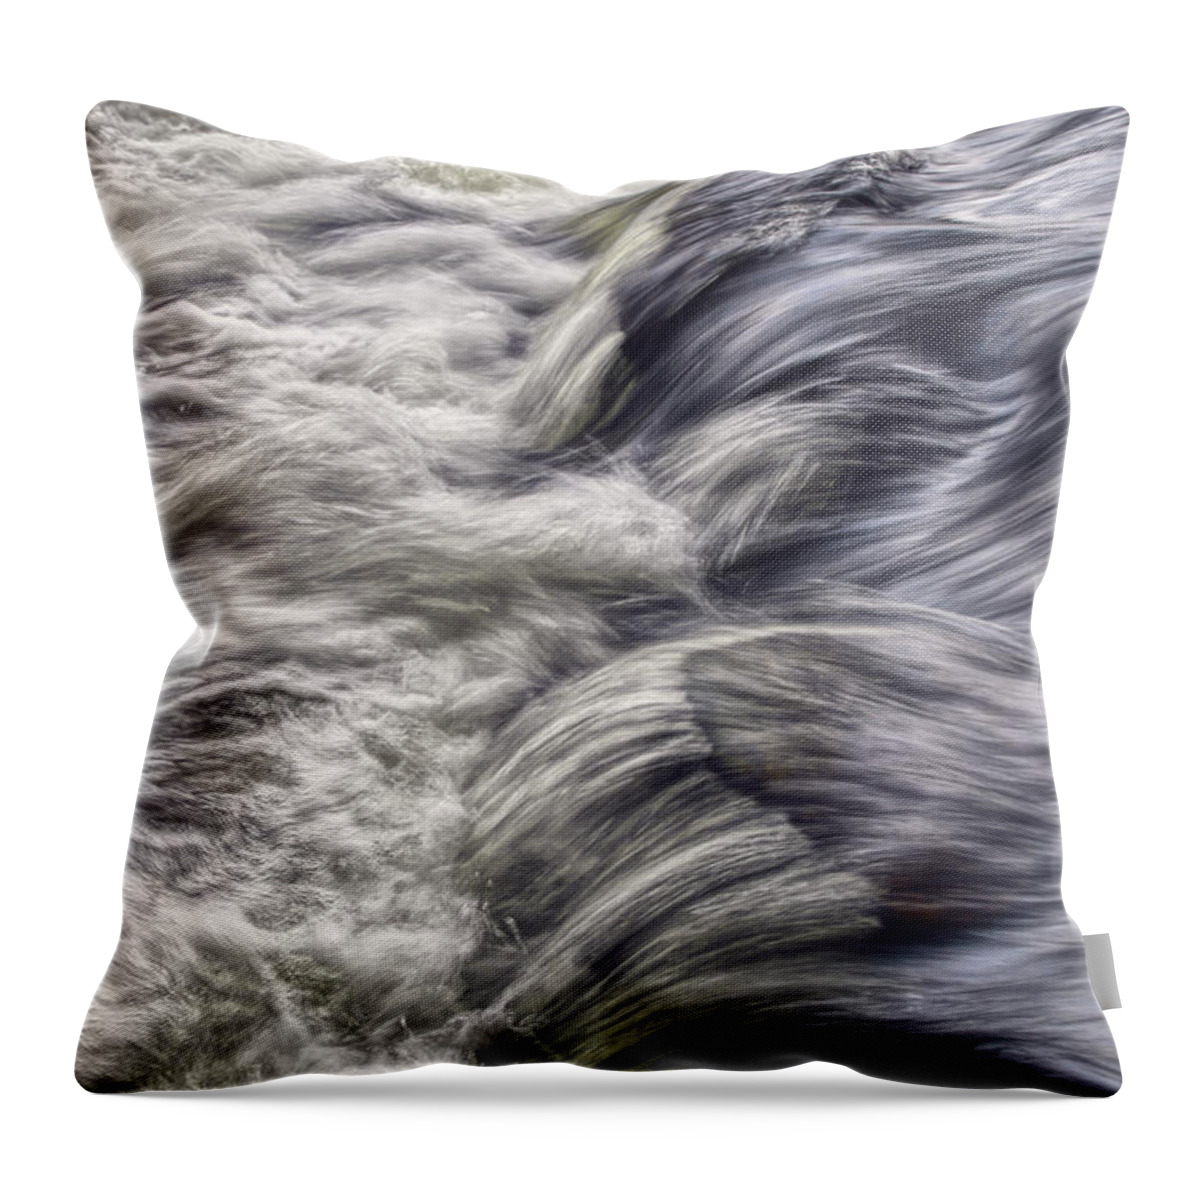 Nemo Rapids Throw Pillow featuring the photograph Nemo Rapids 14 by Phil Perkins